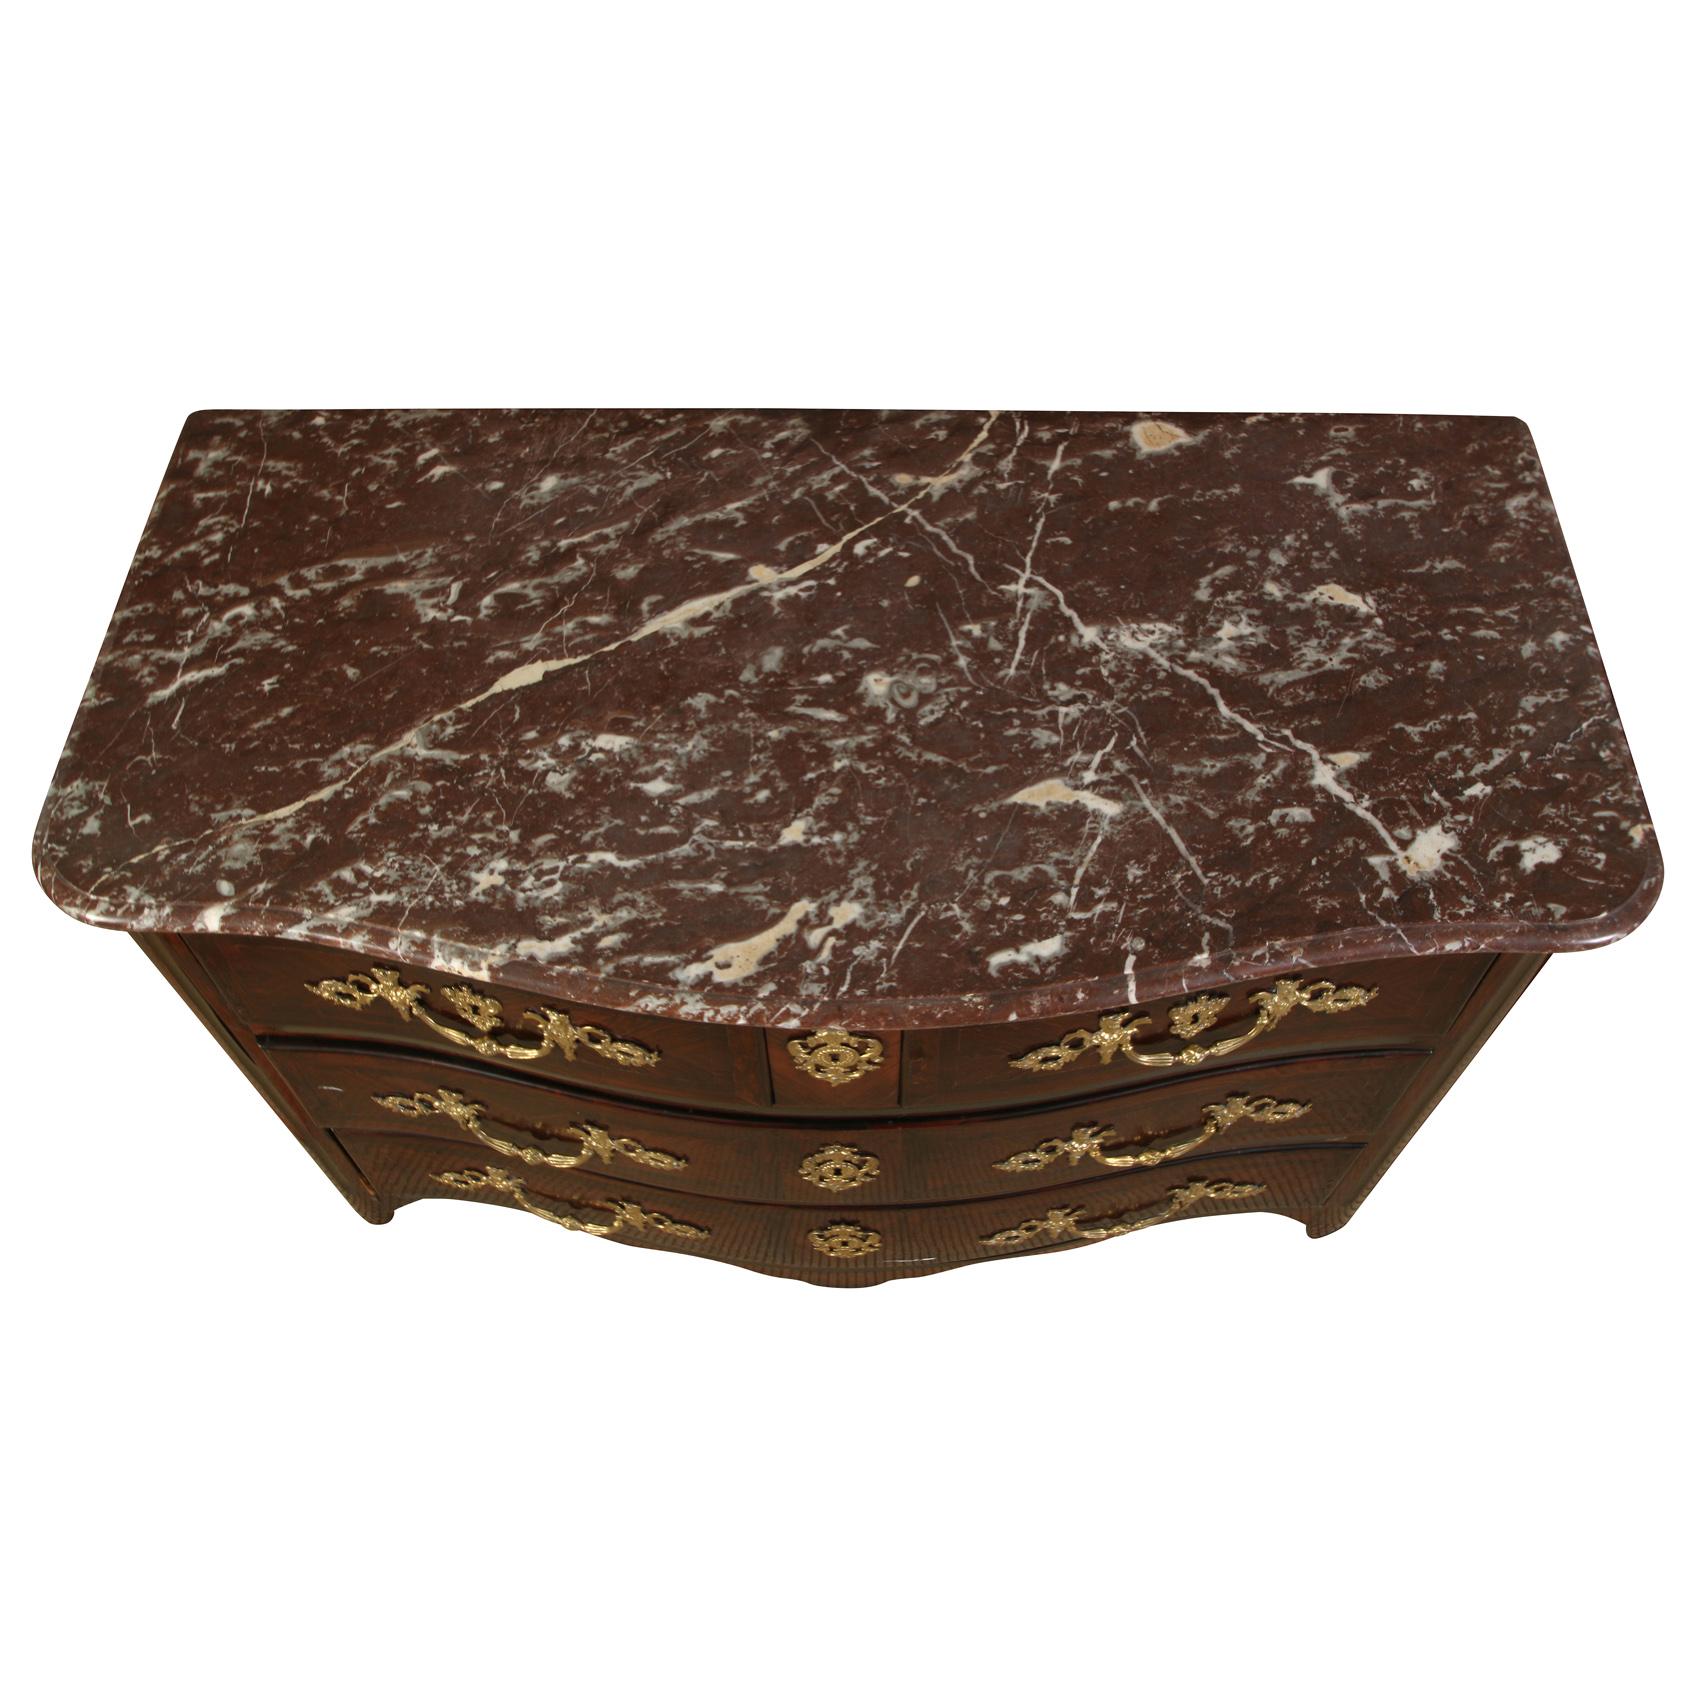 Regence Brass and Ormolu Mount Serpentine Front Commode In Good Condition For Sale In Locust Valley, NY